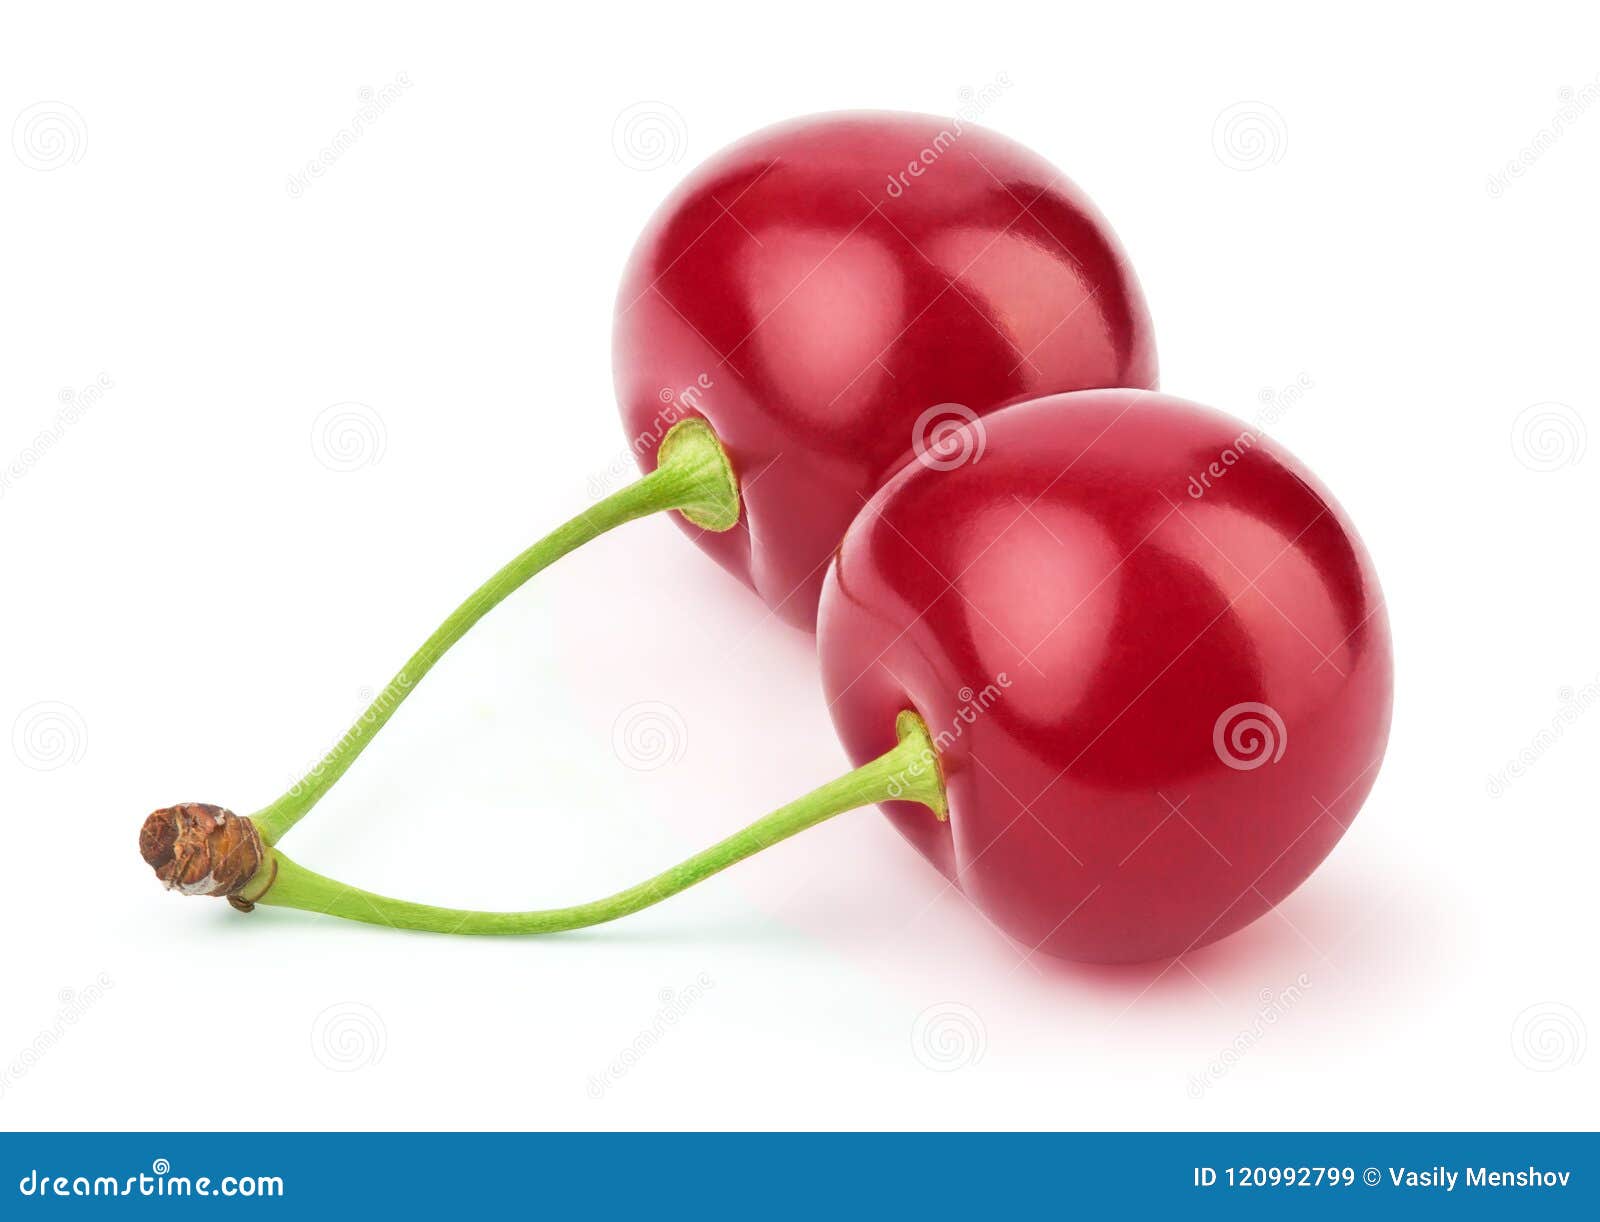 Two Fresh Cherries Isolated on White Stock Image - Image of cherry ...